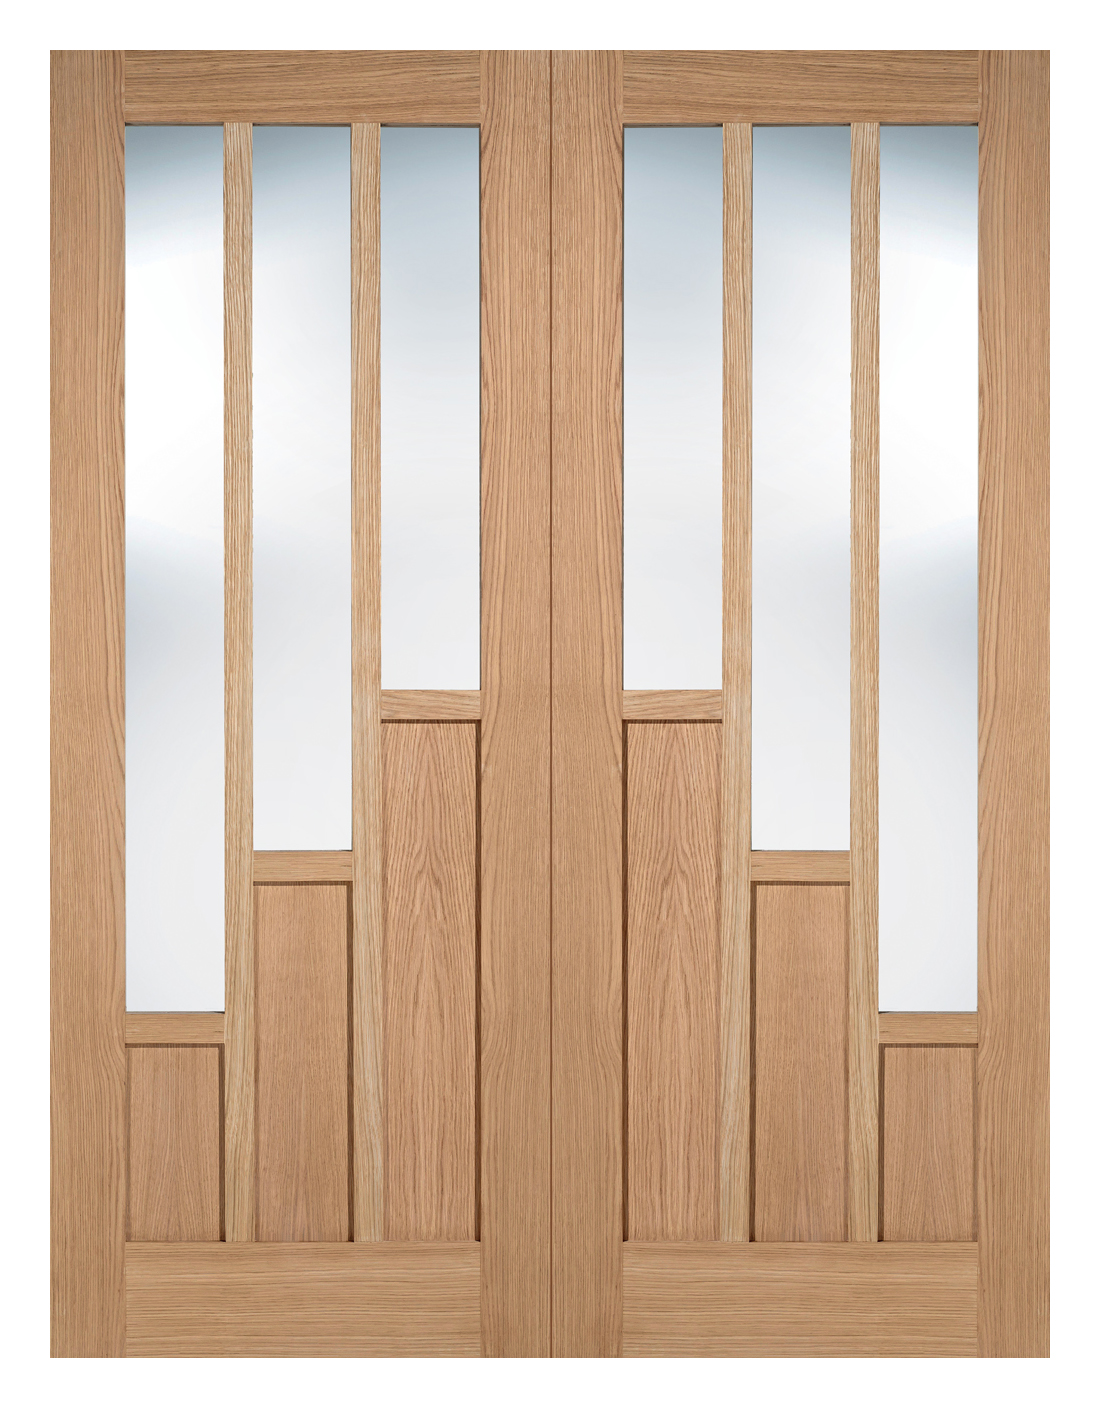 LPD Internal Coventry Pair Clear Glazed Pre-Finished Oak Door - 1981mm